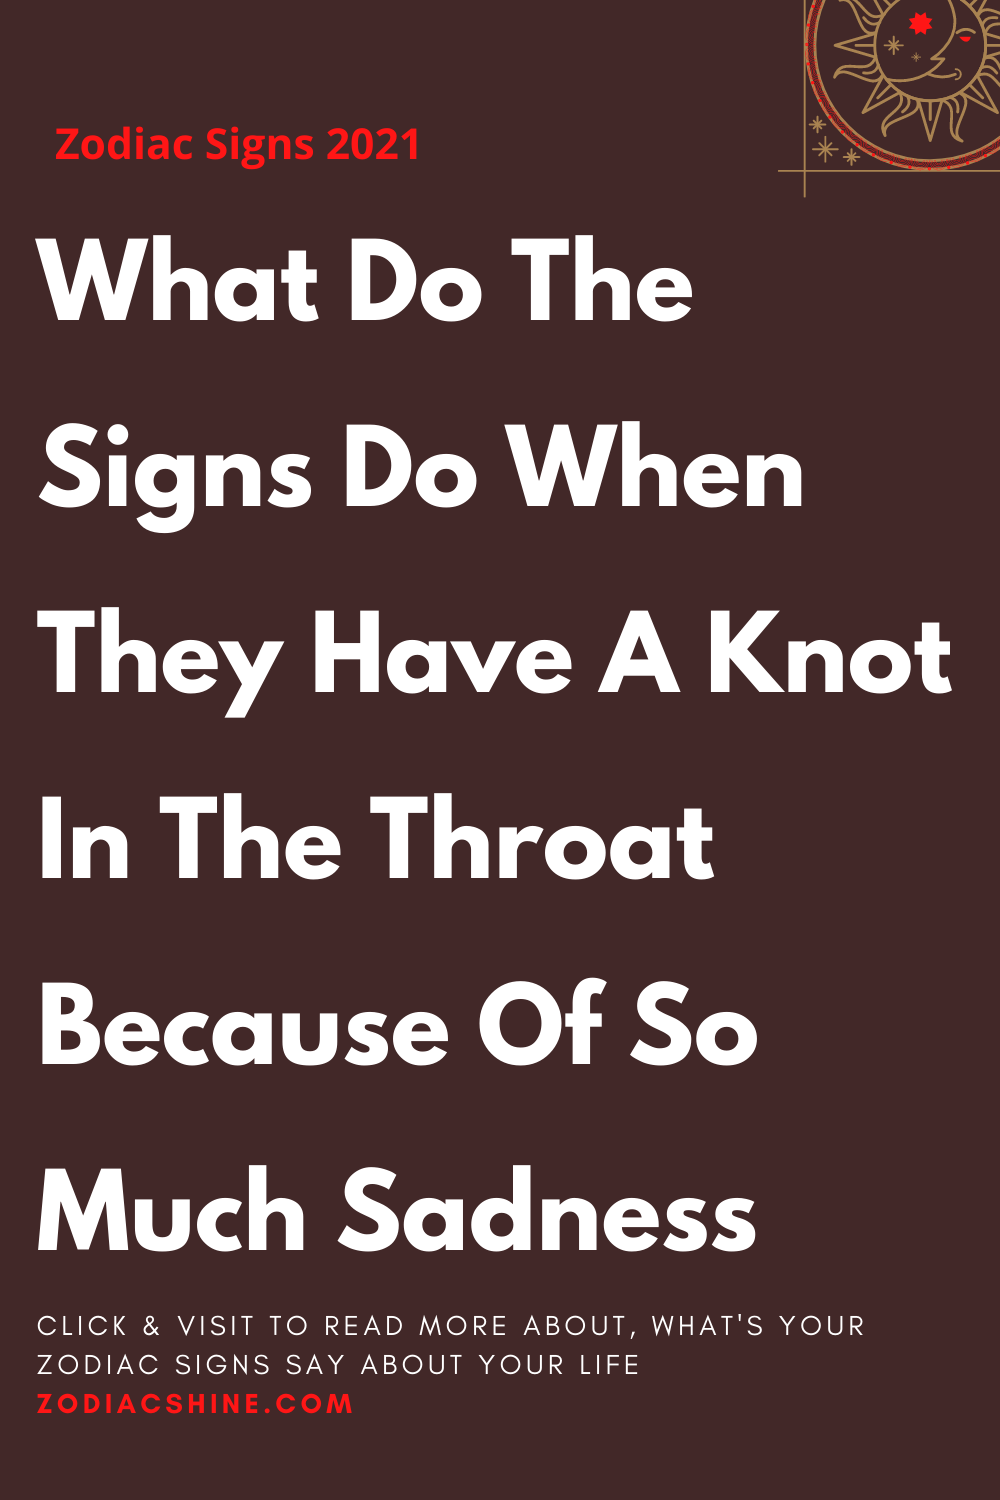 What Do The Signs Do When They Have A Knot In The Throat Because Of So Much Sadness